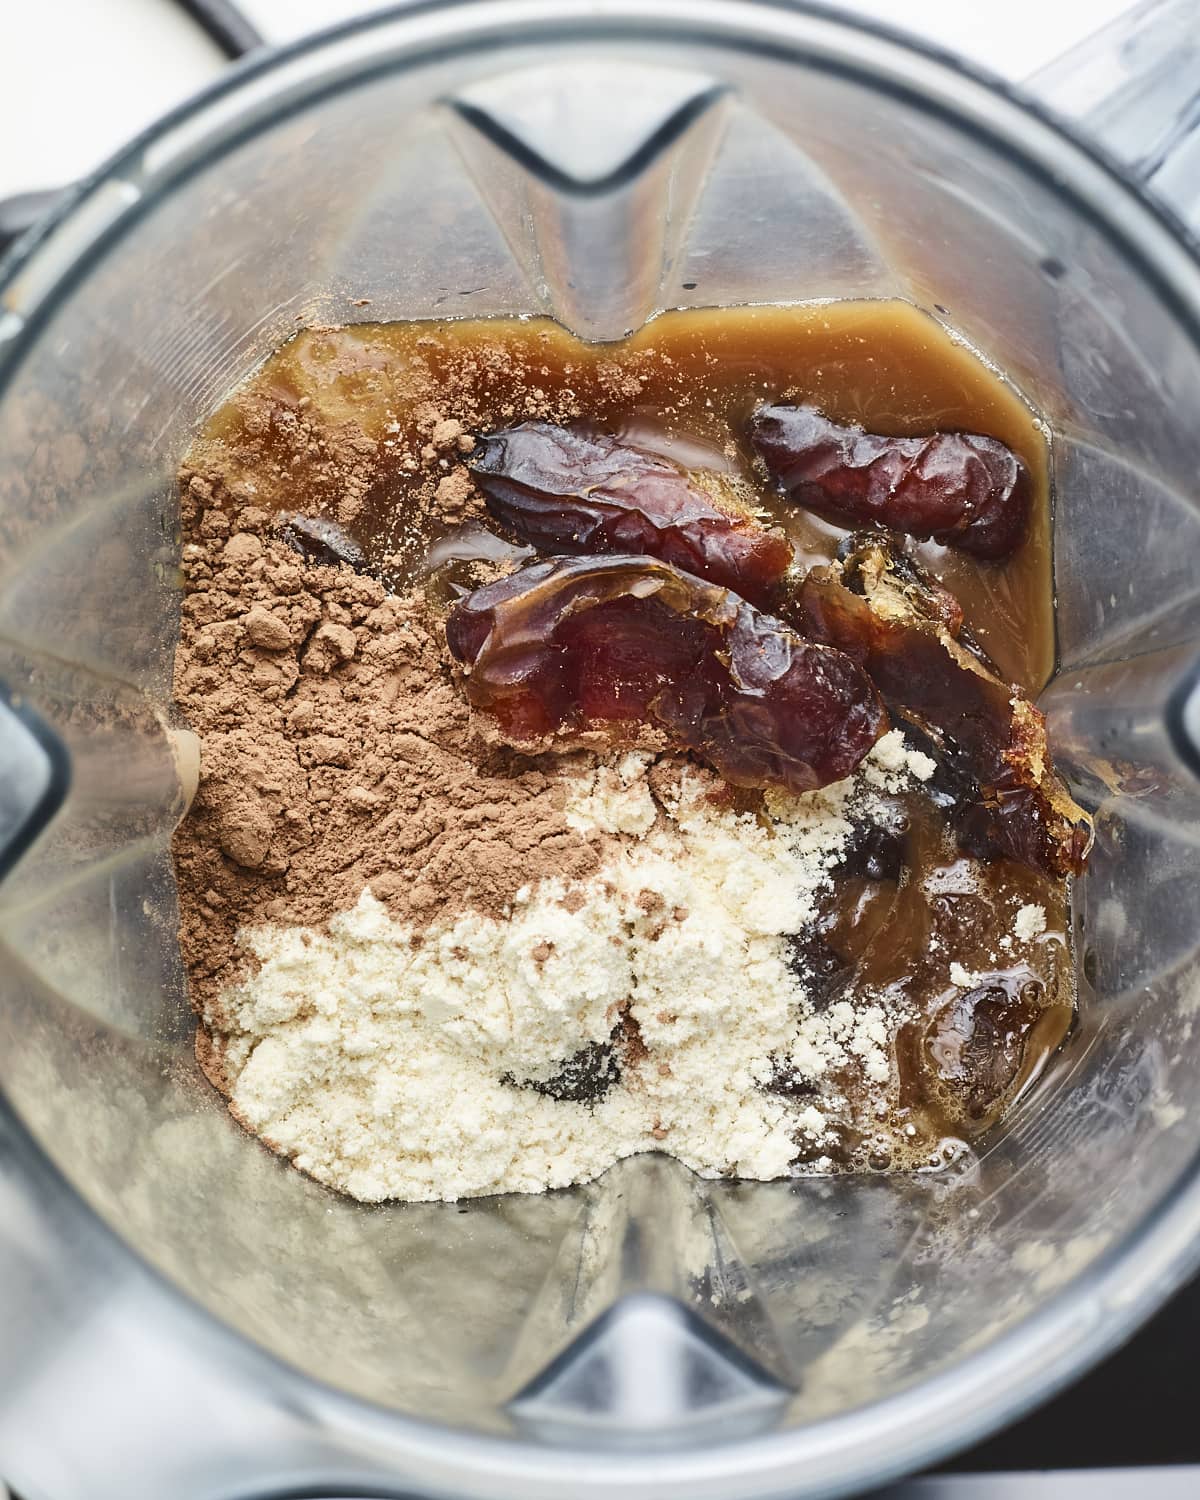 Cold brew, cocoa powder, protein powder and dates in a blender.